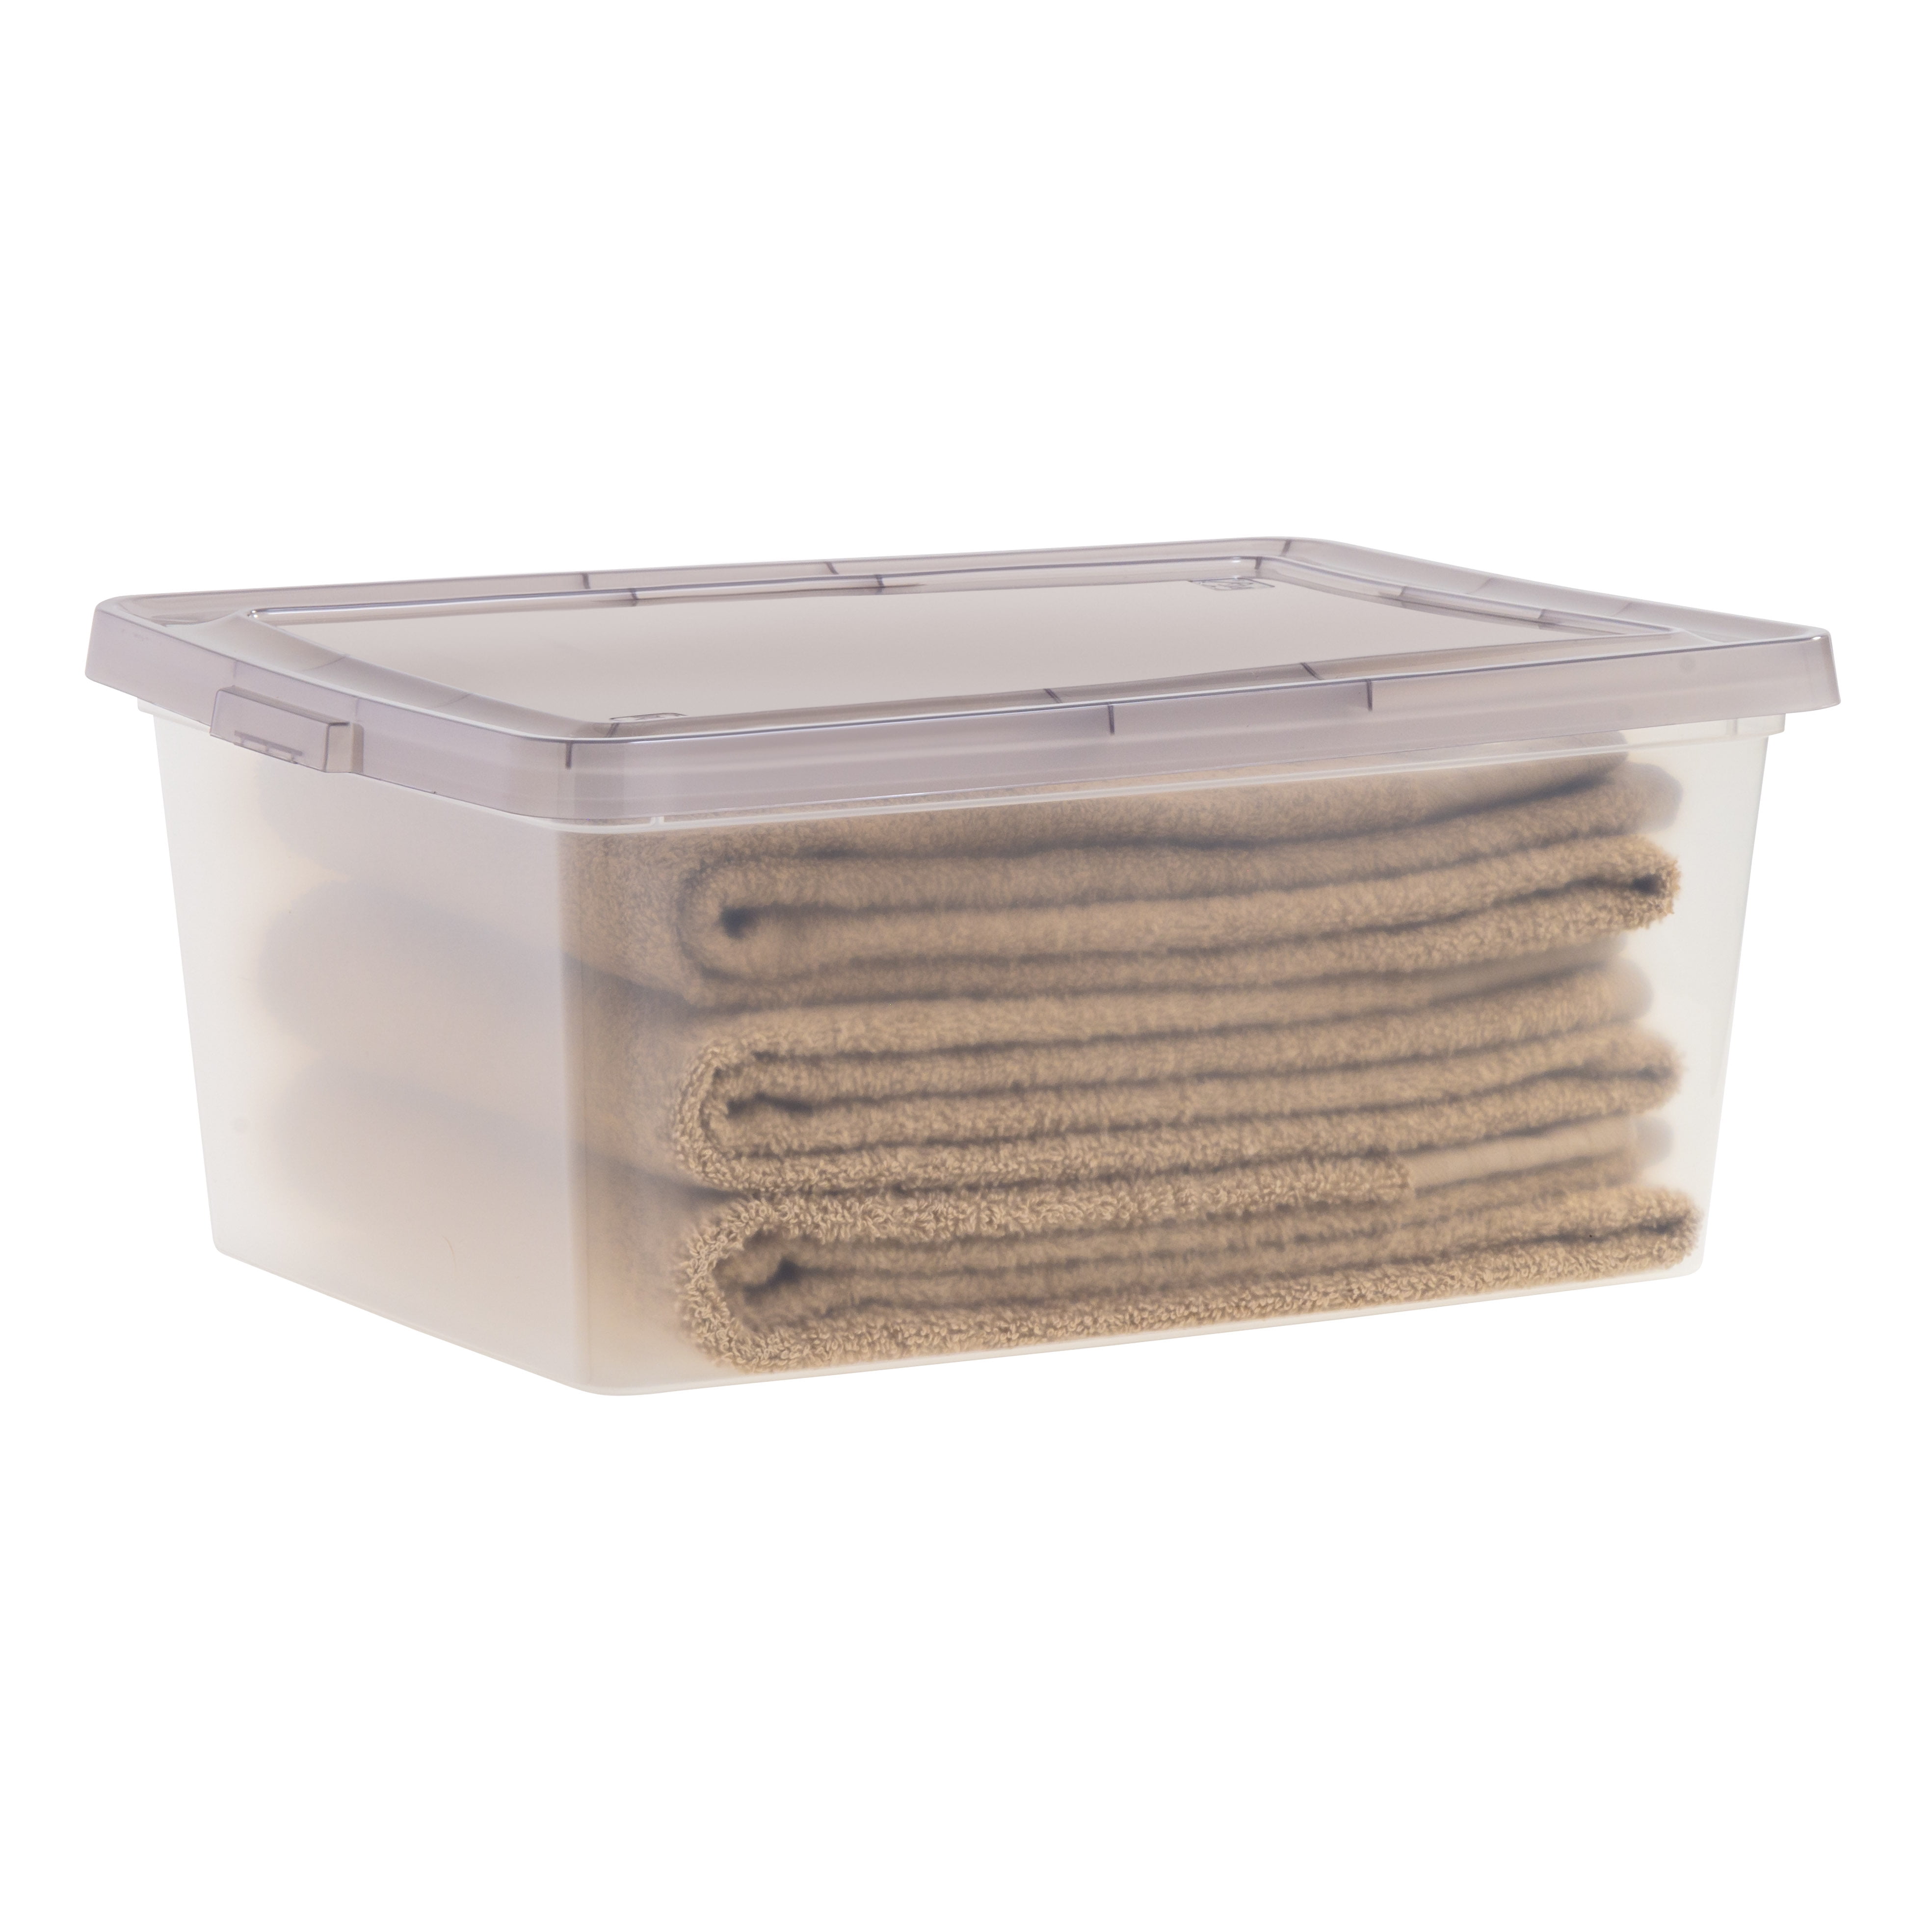 IRIS 17 quart Storage Box External Dimensions 17.5 Length x 12 Width x 17.5  Depth x 7 Height 4.25 gal Snap in Lid Closure Stackable Plastic Clear For  Scissors Notebook Office Supplies